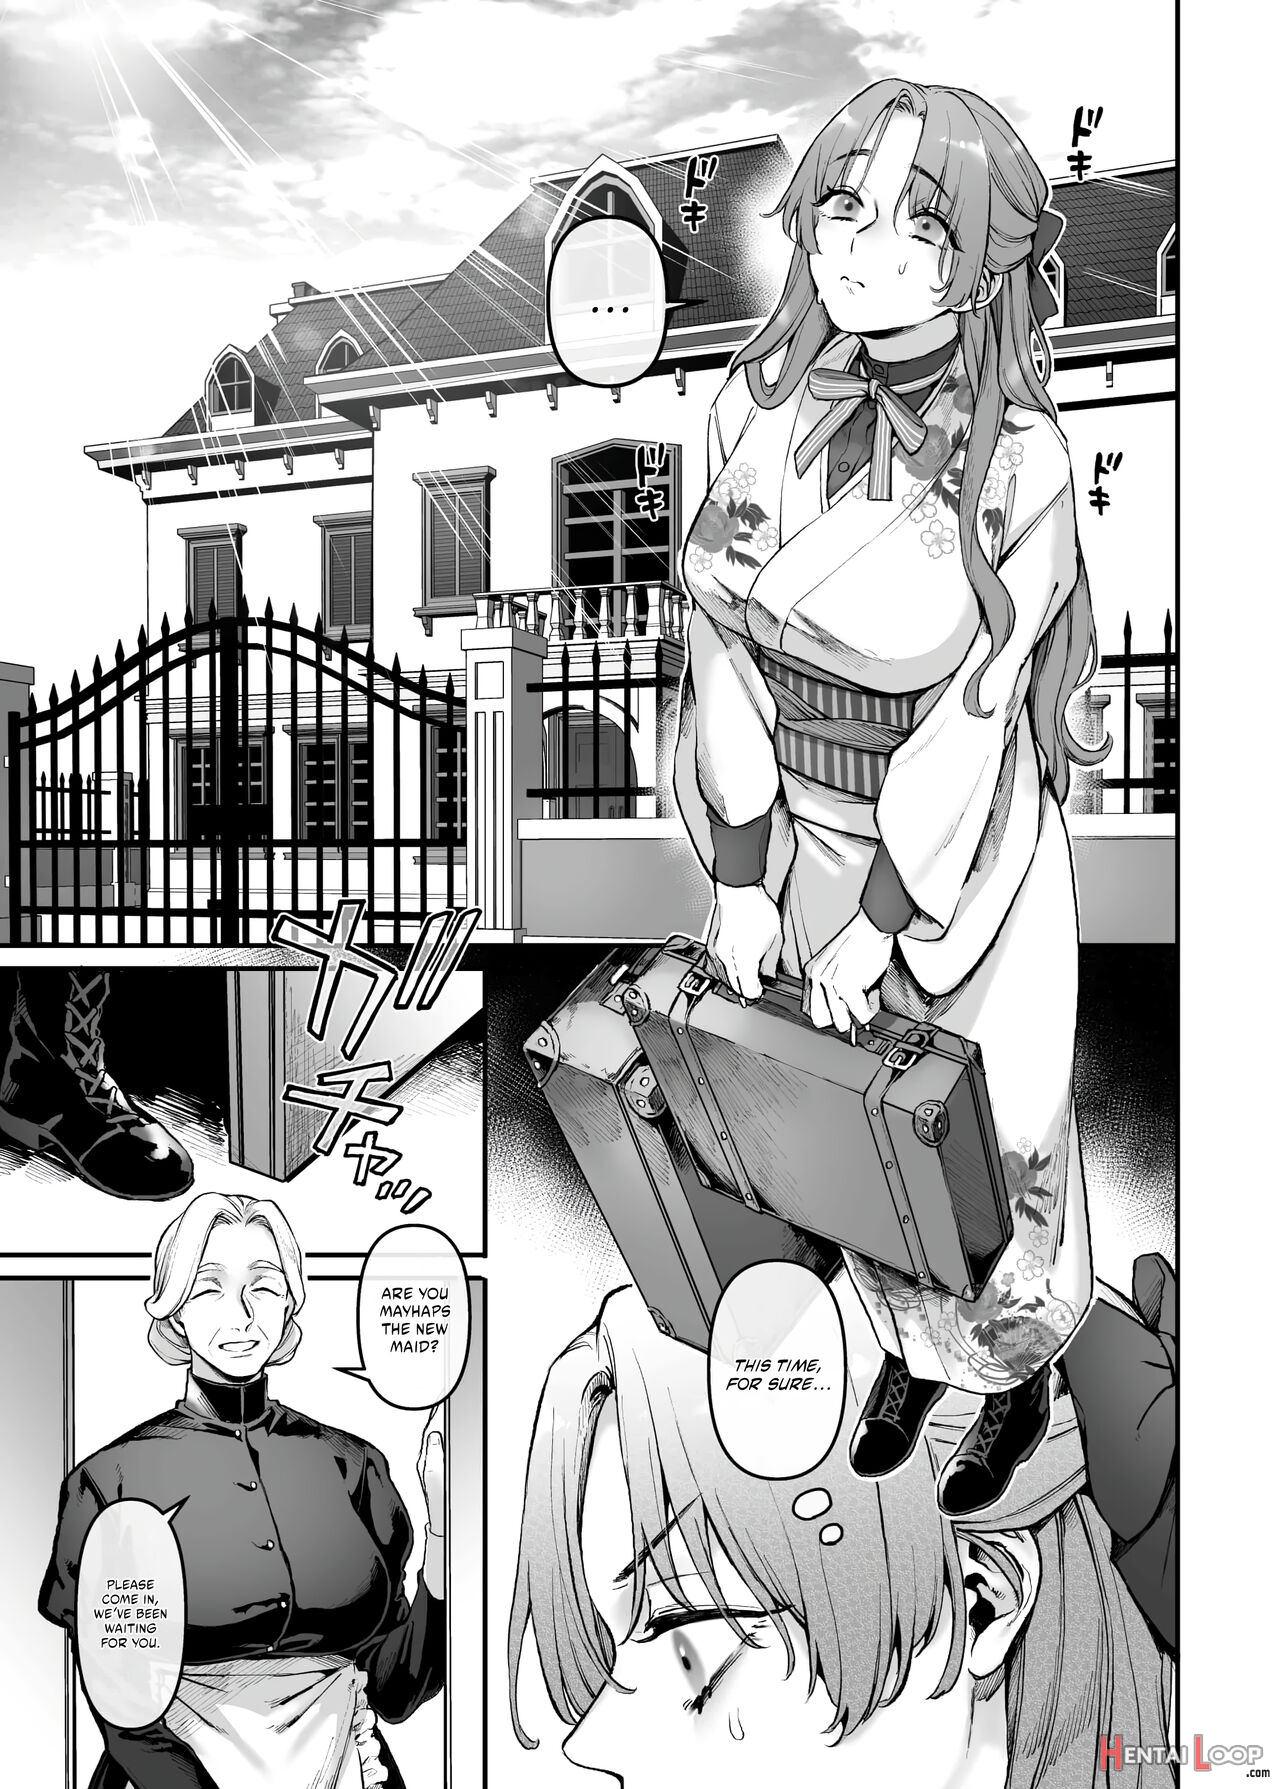 Infiltrate! Debt Repayment Rta Of A Spy On The Brink ~the Crossdressing Maid And The Oni Boss~ page 6